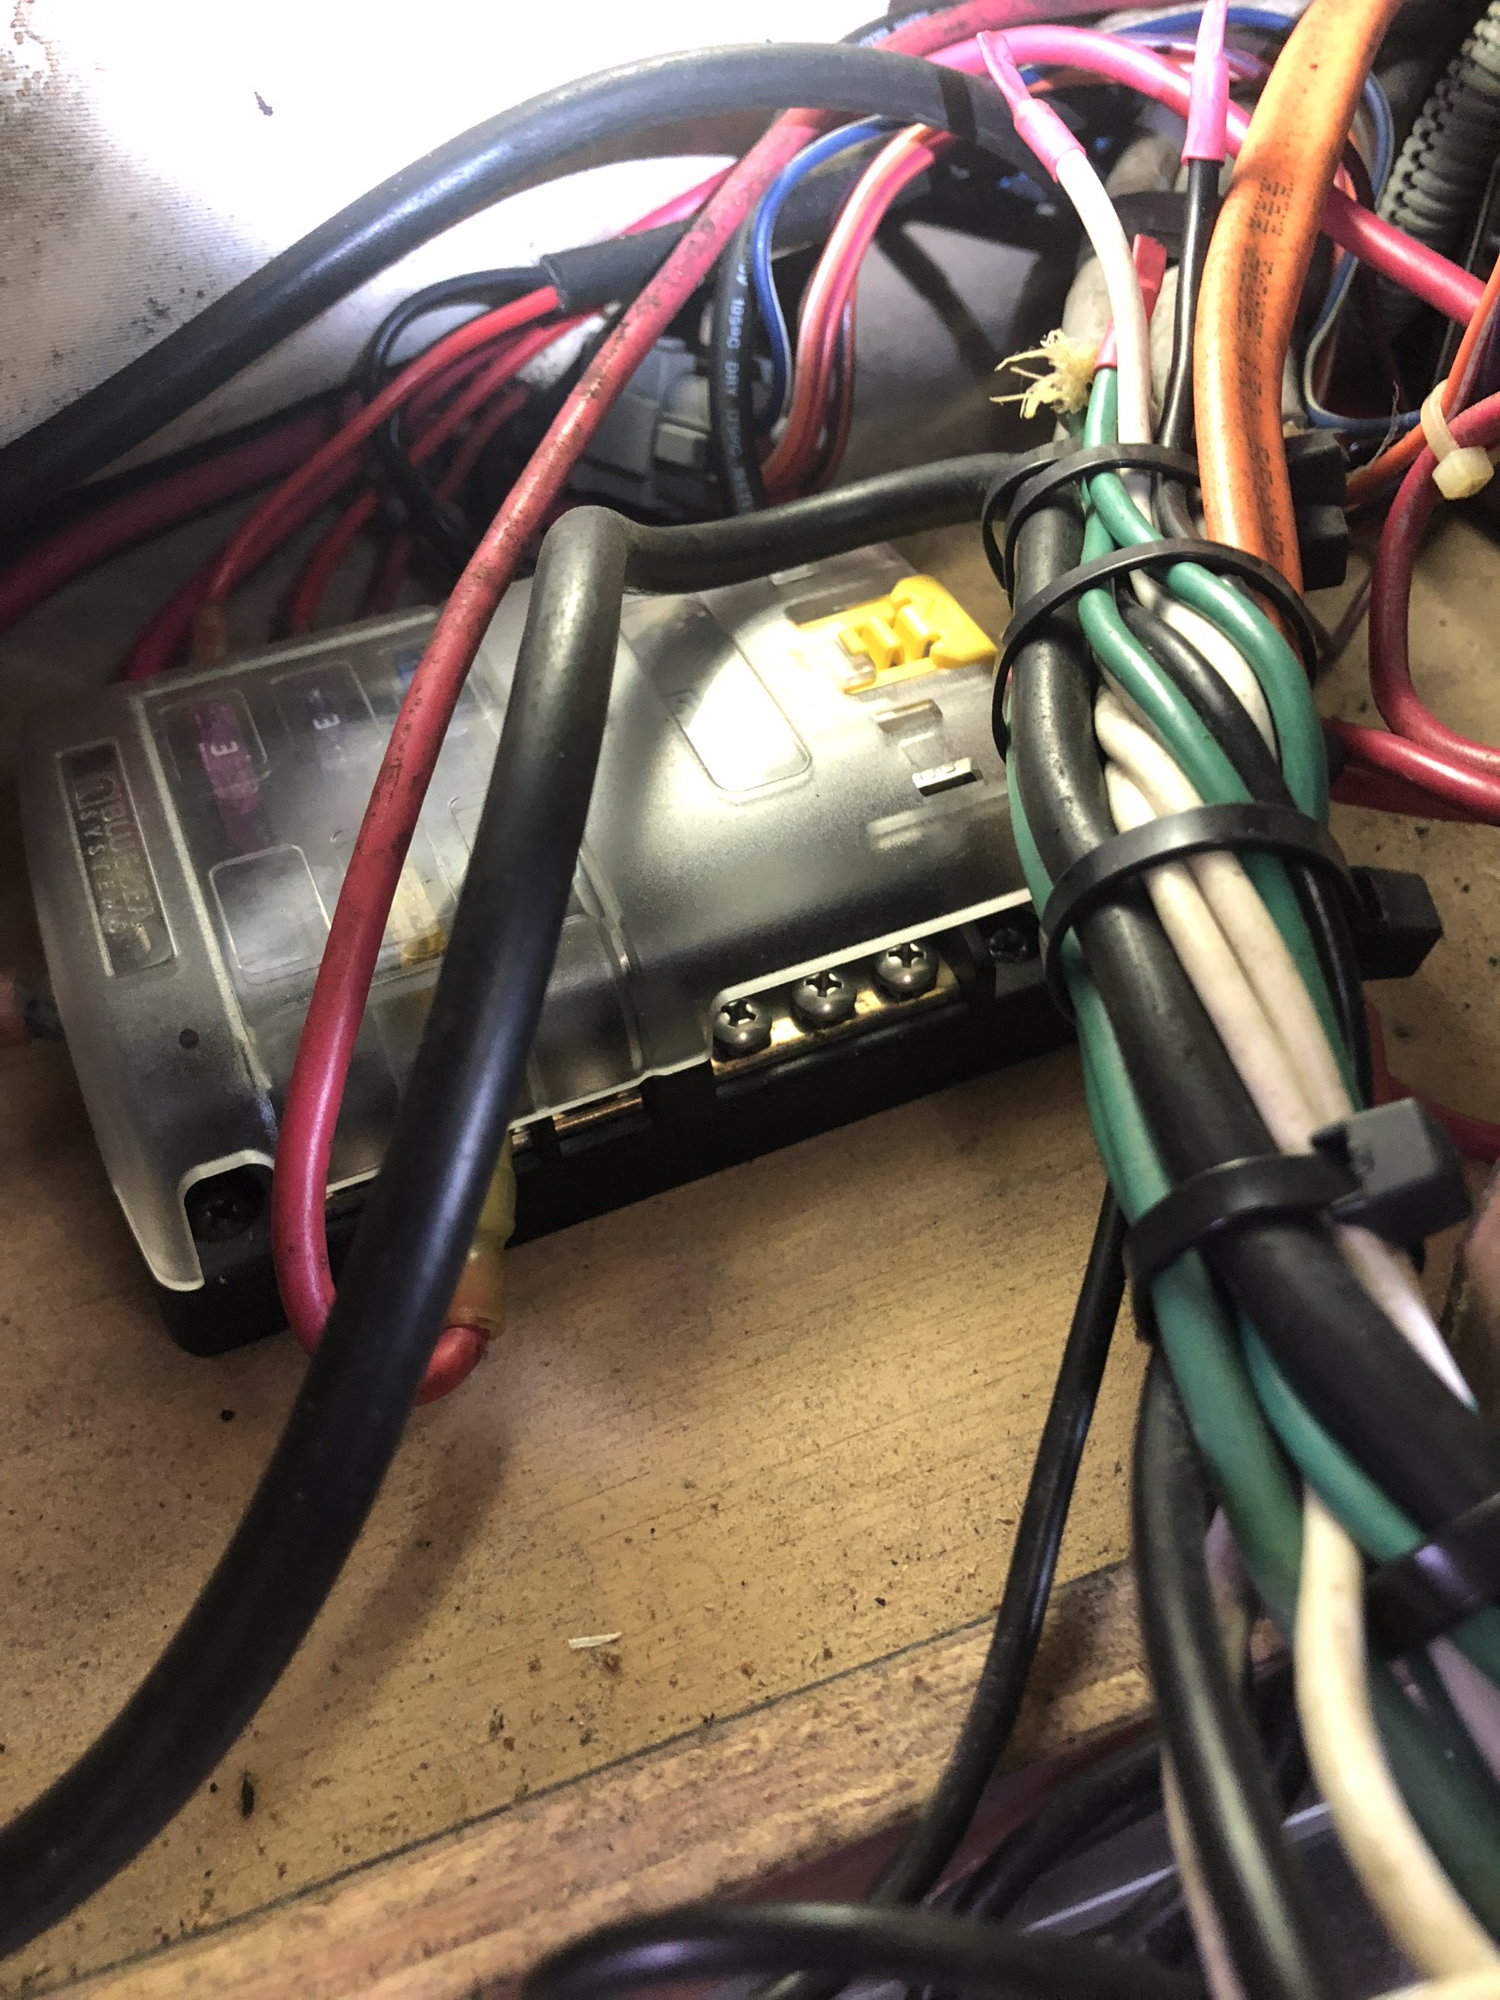 Boat rewire. Where to start? - The Hull Truth - Boating and Fishing Forum